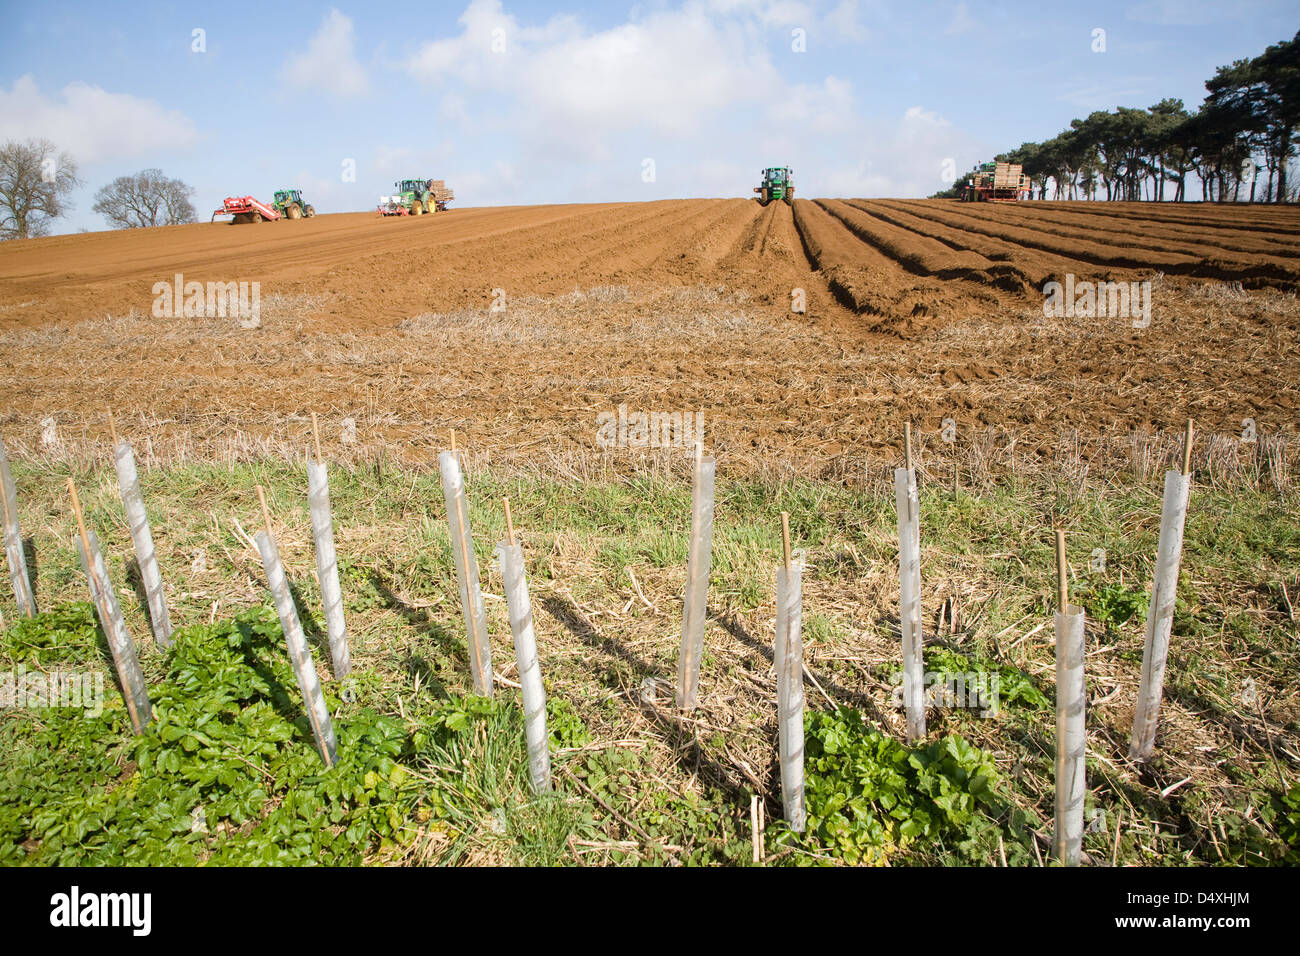 Farm machinery preparing and planting a crop of potatoes in a field, Shottisham, Suffolk, England Stock Photo